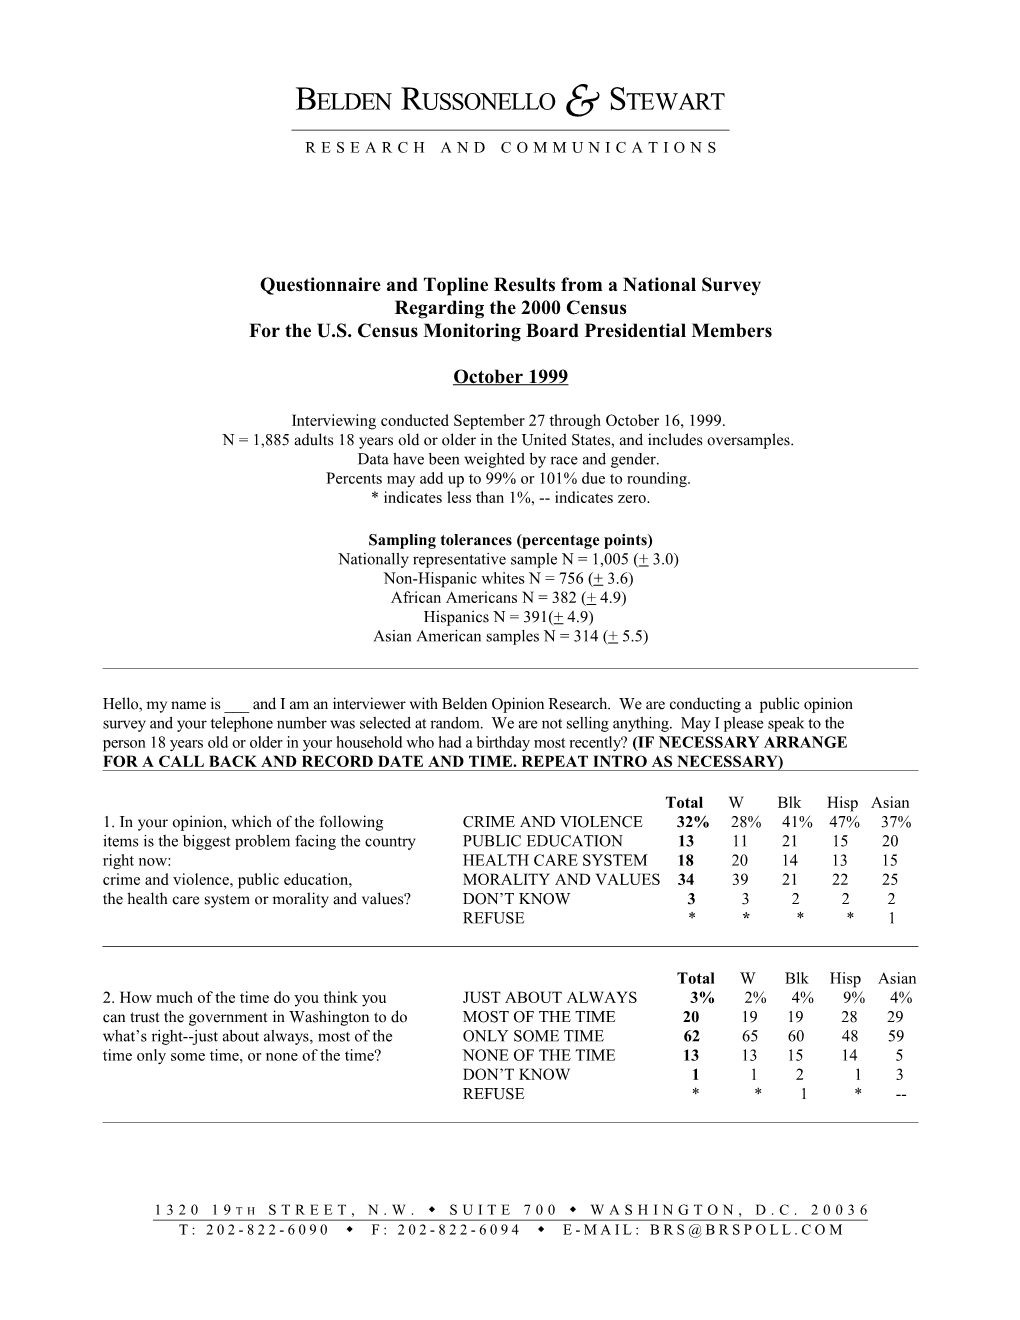 Questionnaire and Topline Results from a National Poll